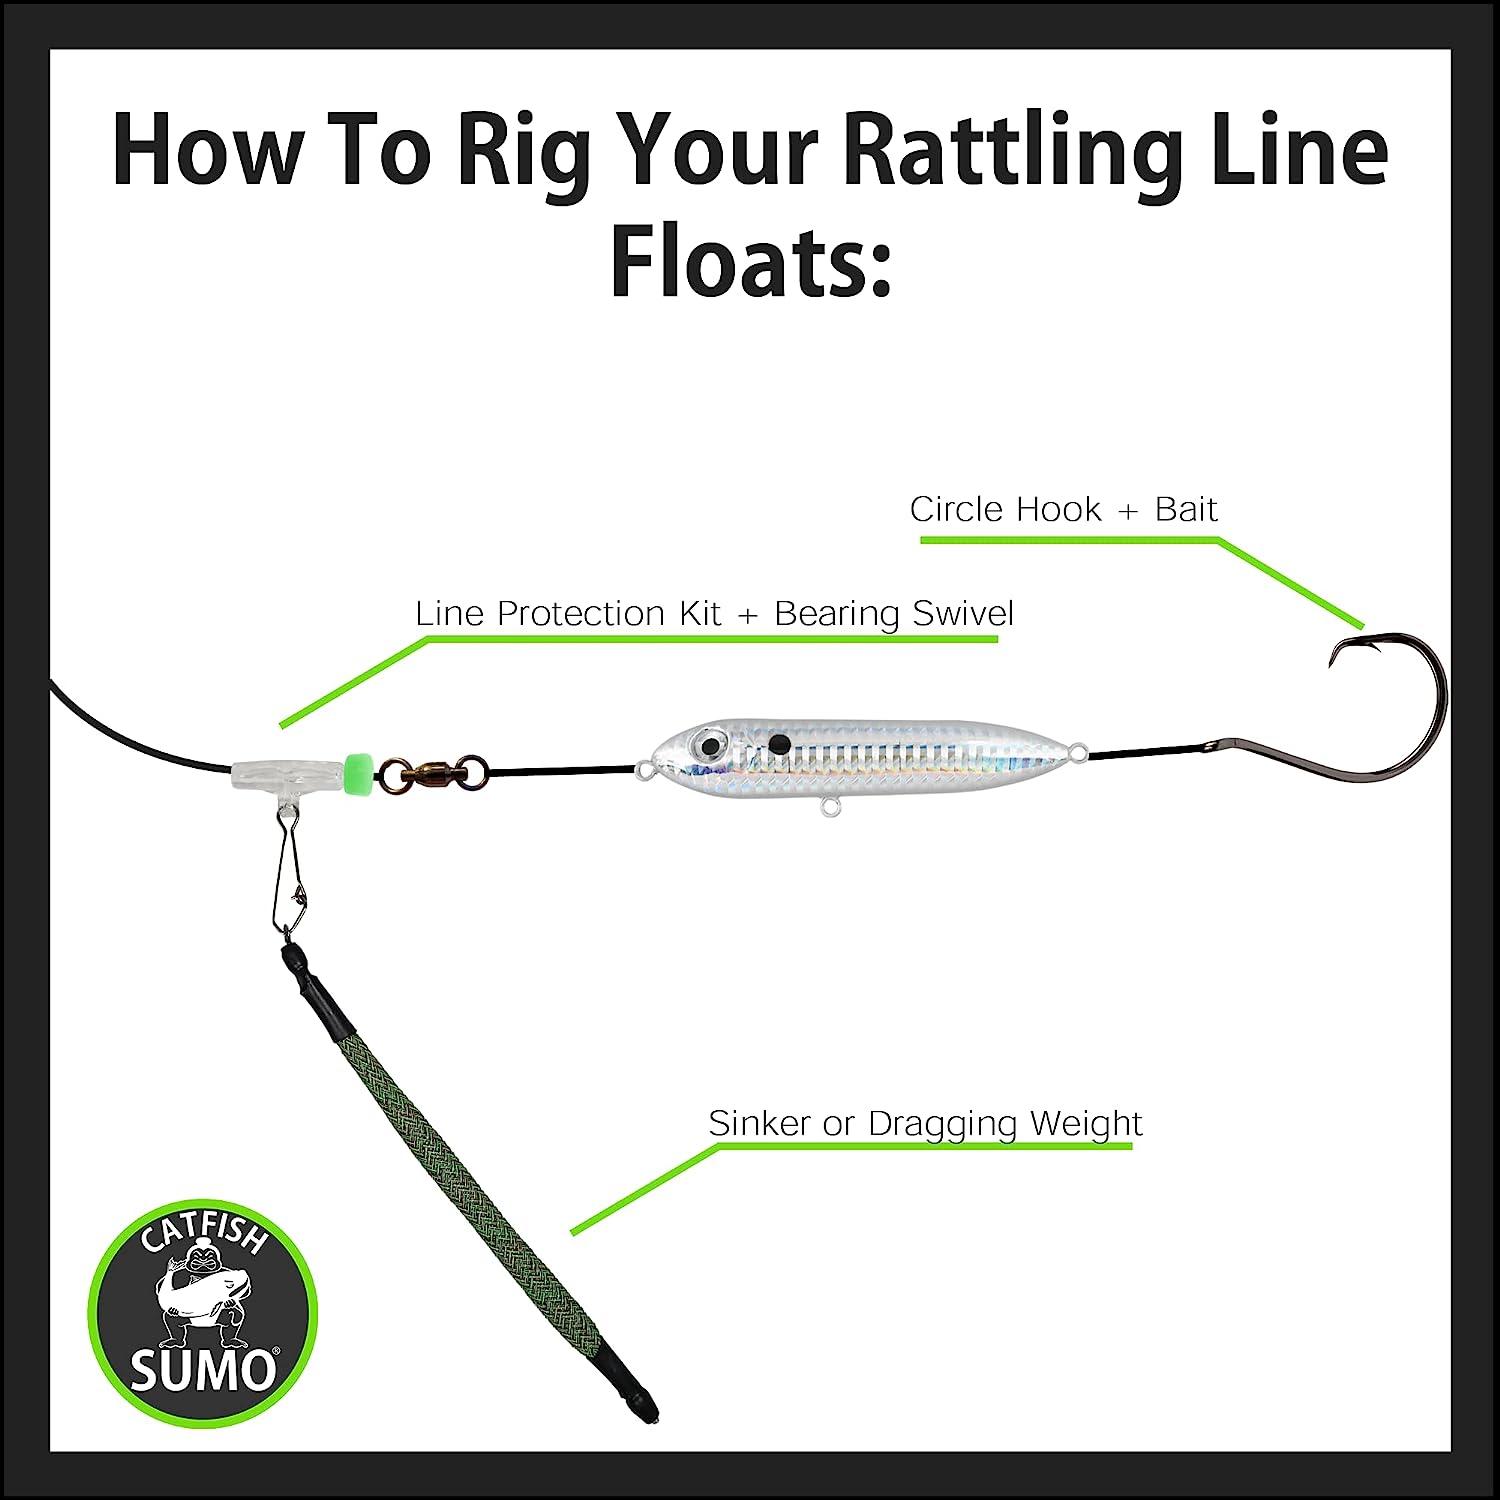 Catfish Rattling Line Float Lure for Catfishing, Demon Dragon Style Peg for  Santee Rig Fishing, 4 inch (3-Pack, Threadfin Shad)